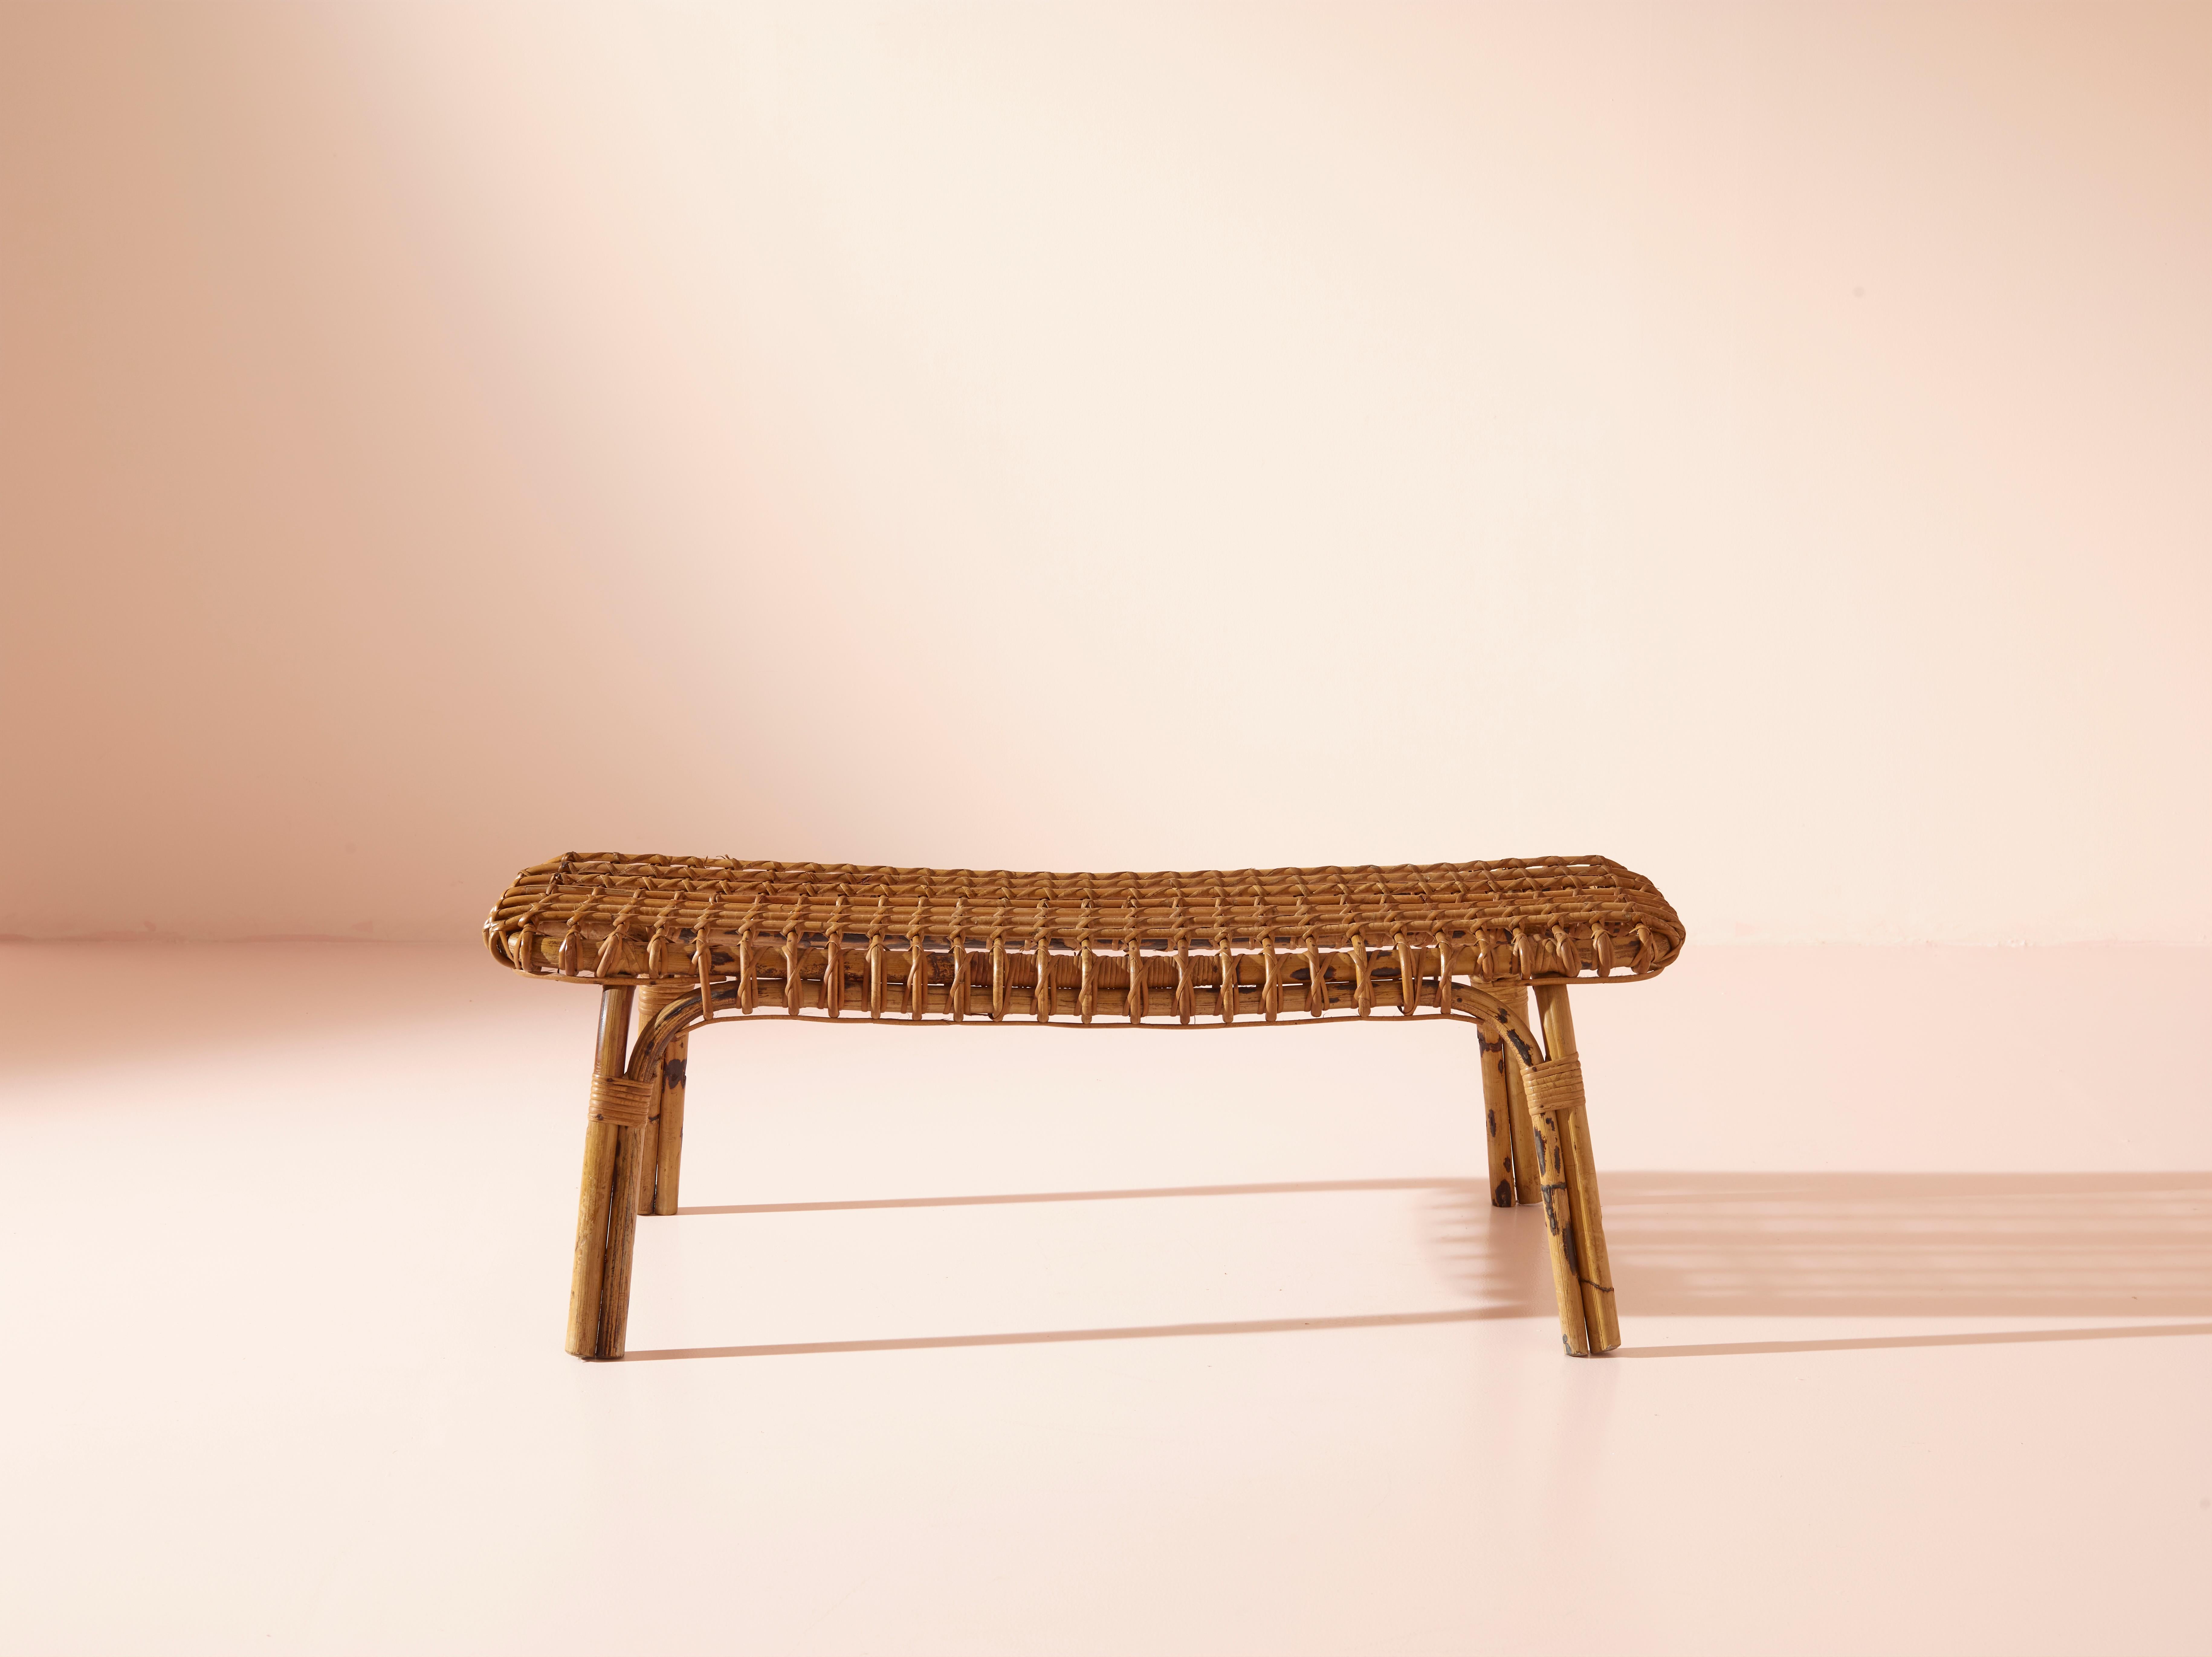 This exquisite bamboo bench originating from 1960s has been produced in Italy and attributed to the renowned furniture maker Vittorio Bonacina. 

The bamboo construction of the bench exhibits a captivating lattice pattern on the seat, elevating